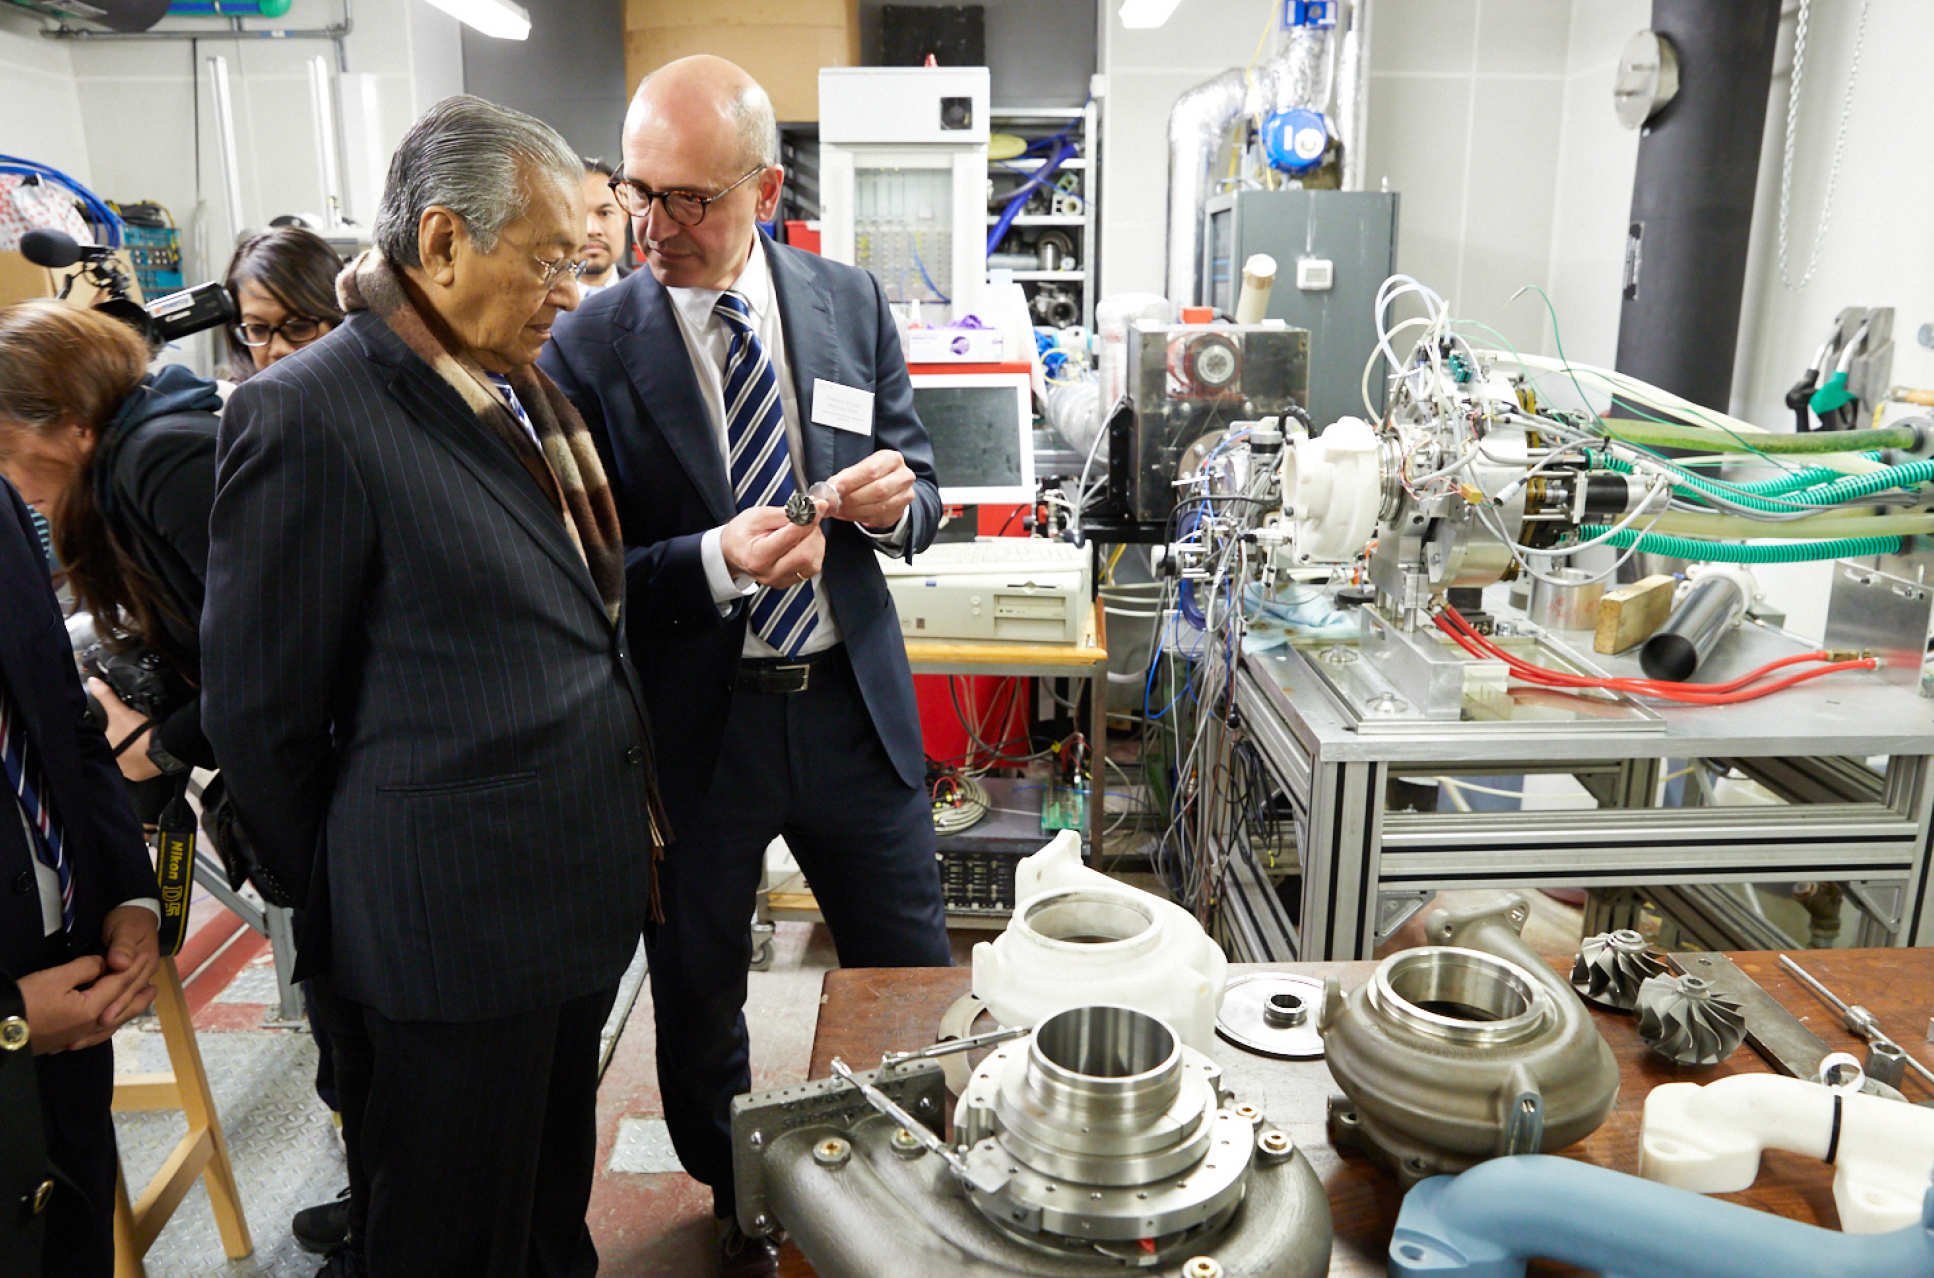 The PM saw how low-carbon vehicle engines are being developed